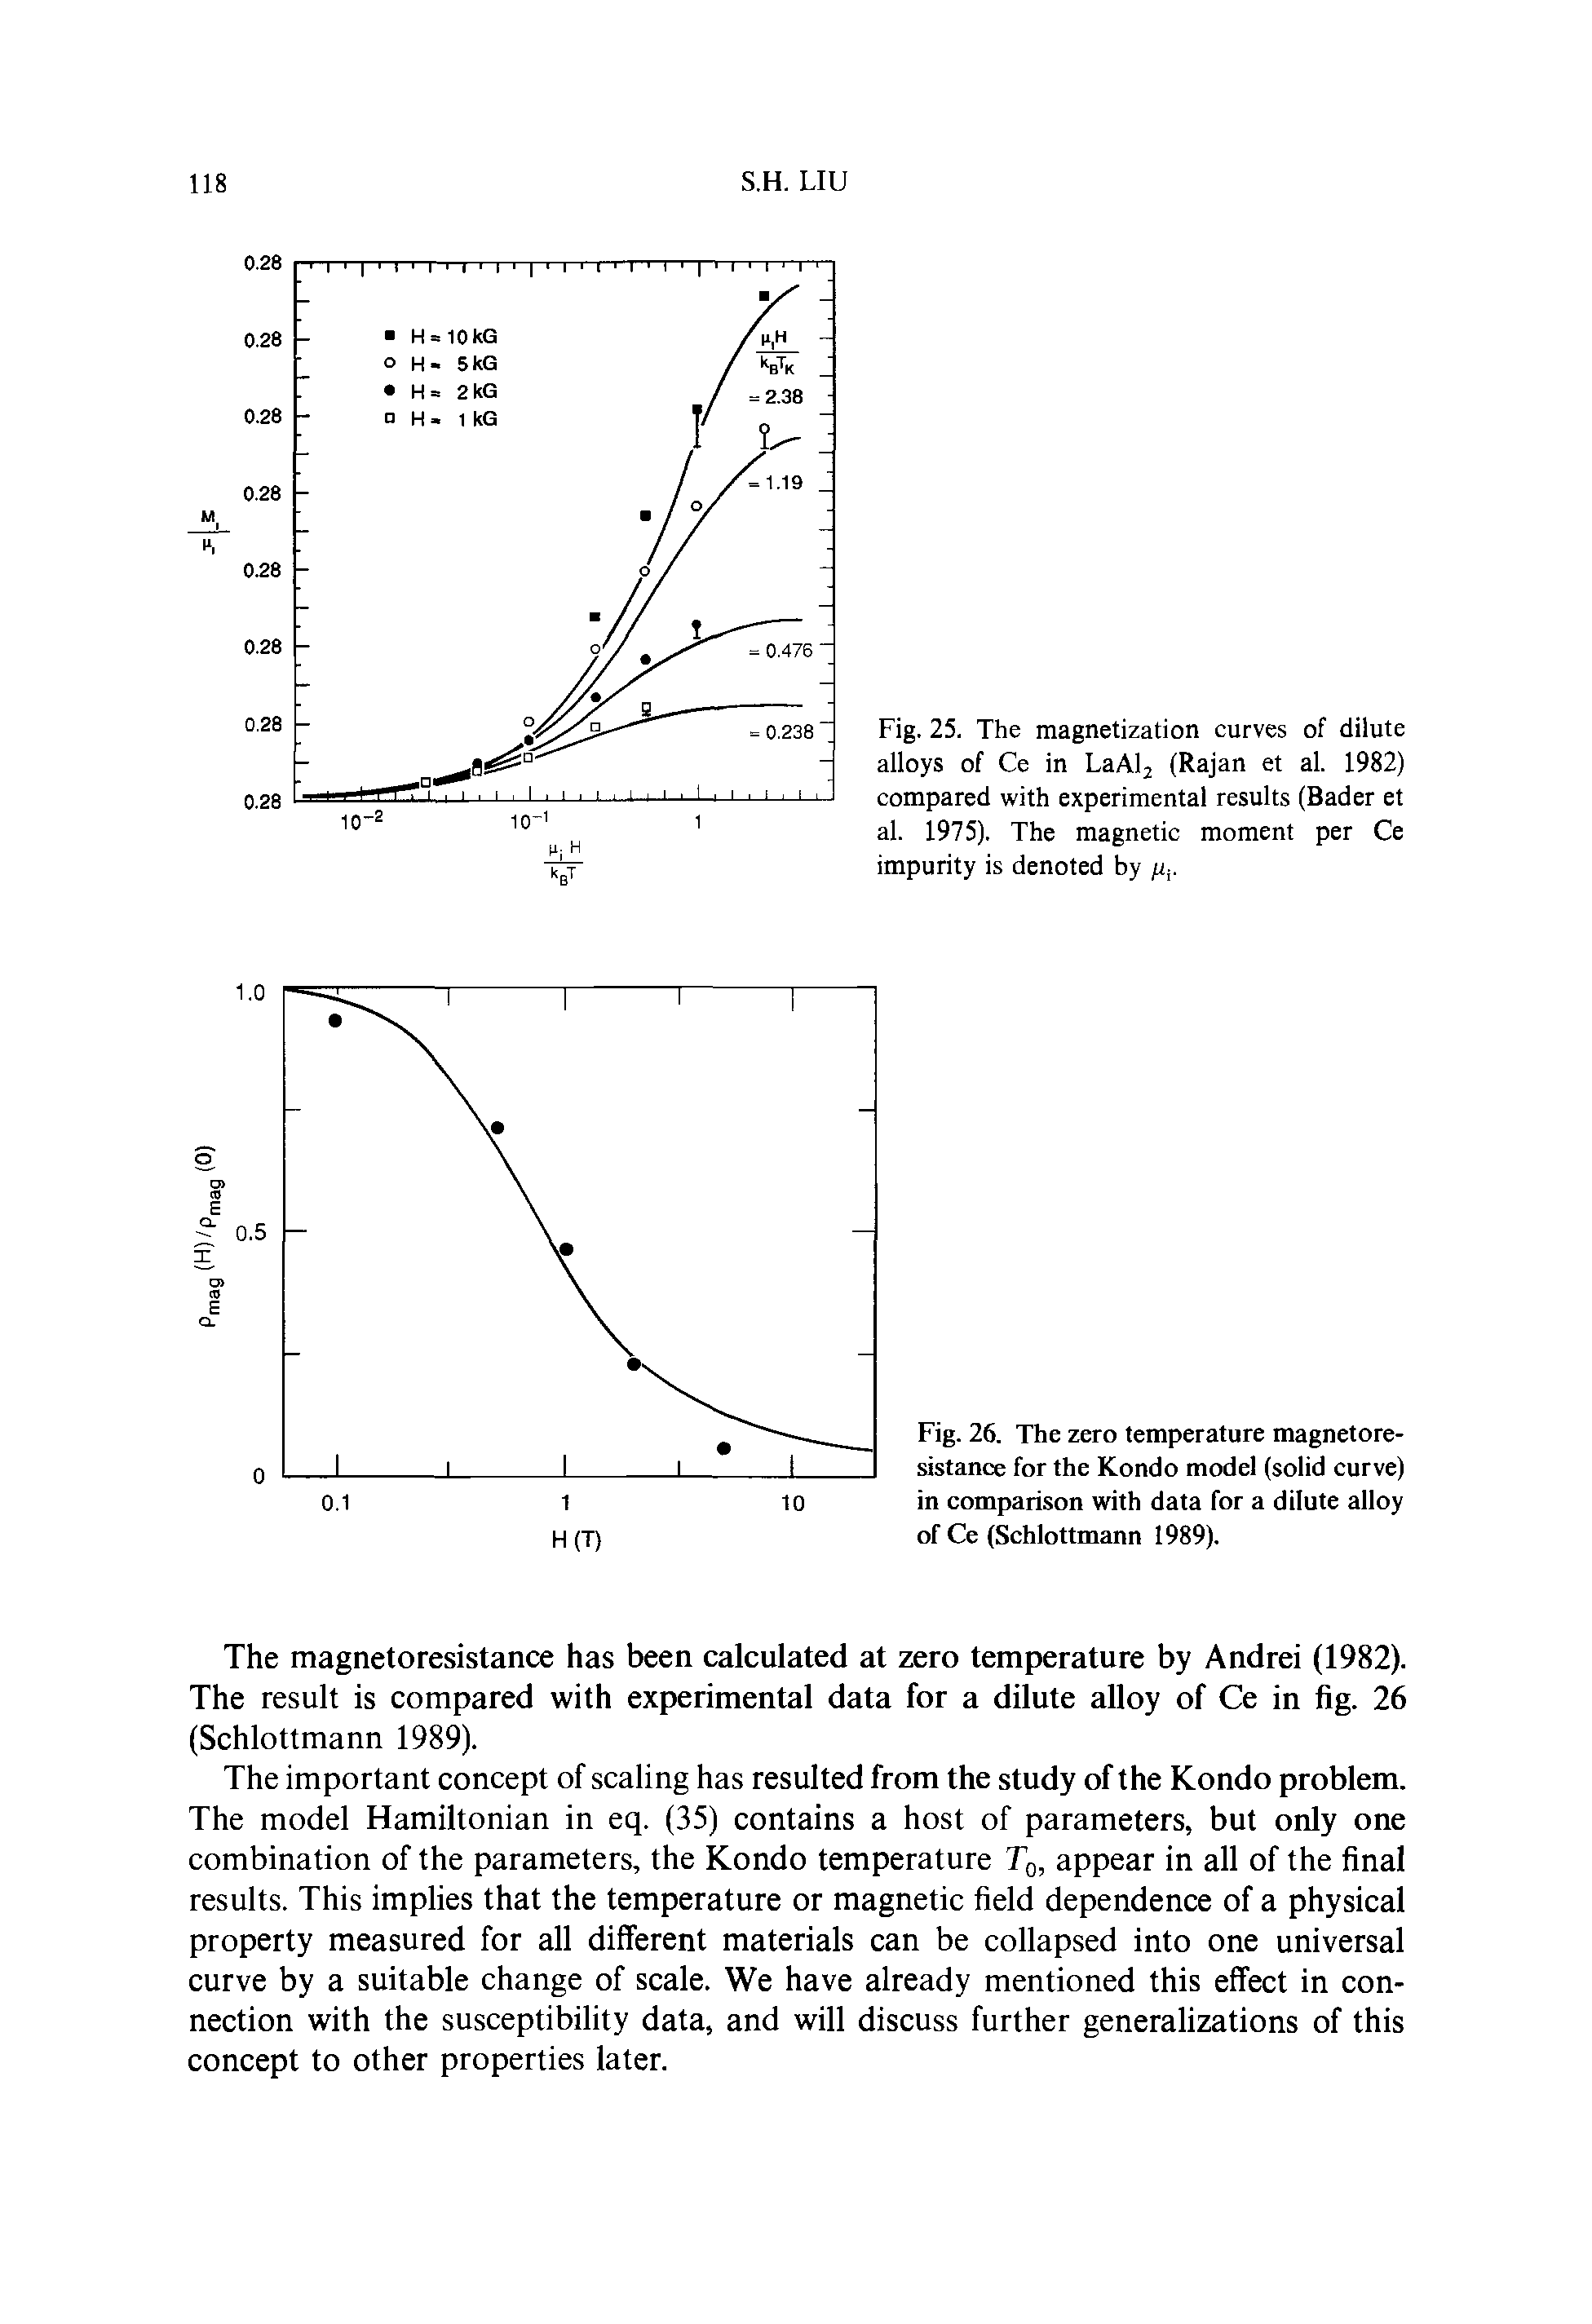 Fig. 26. The zero temperature magnetore-sistance for the Kondo model (solid curve) in comparison with data for a dilute alloy of Ce (Schlottmann 1989).